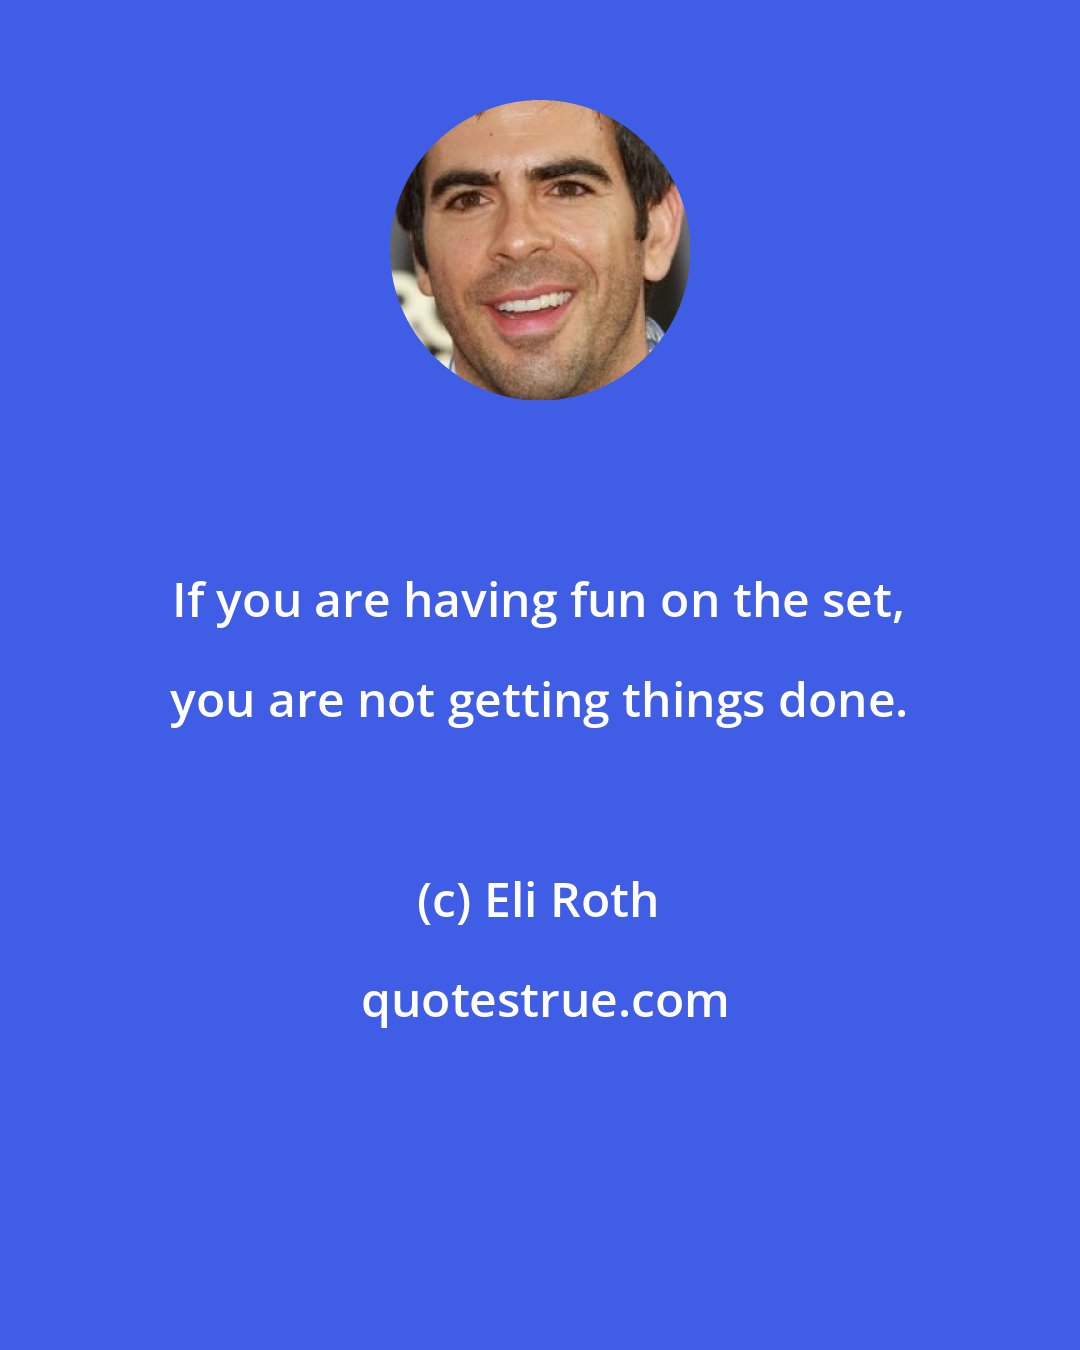 Eli Roth: If you are having fun on the set, you are not getting things done.